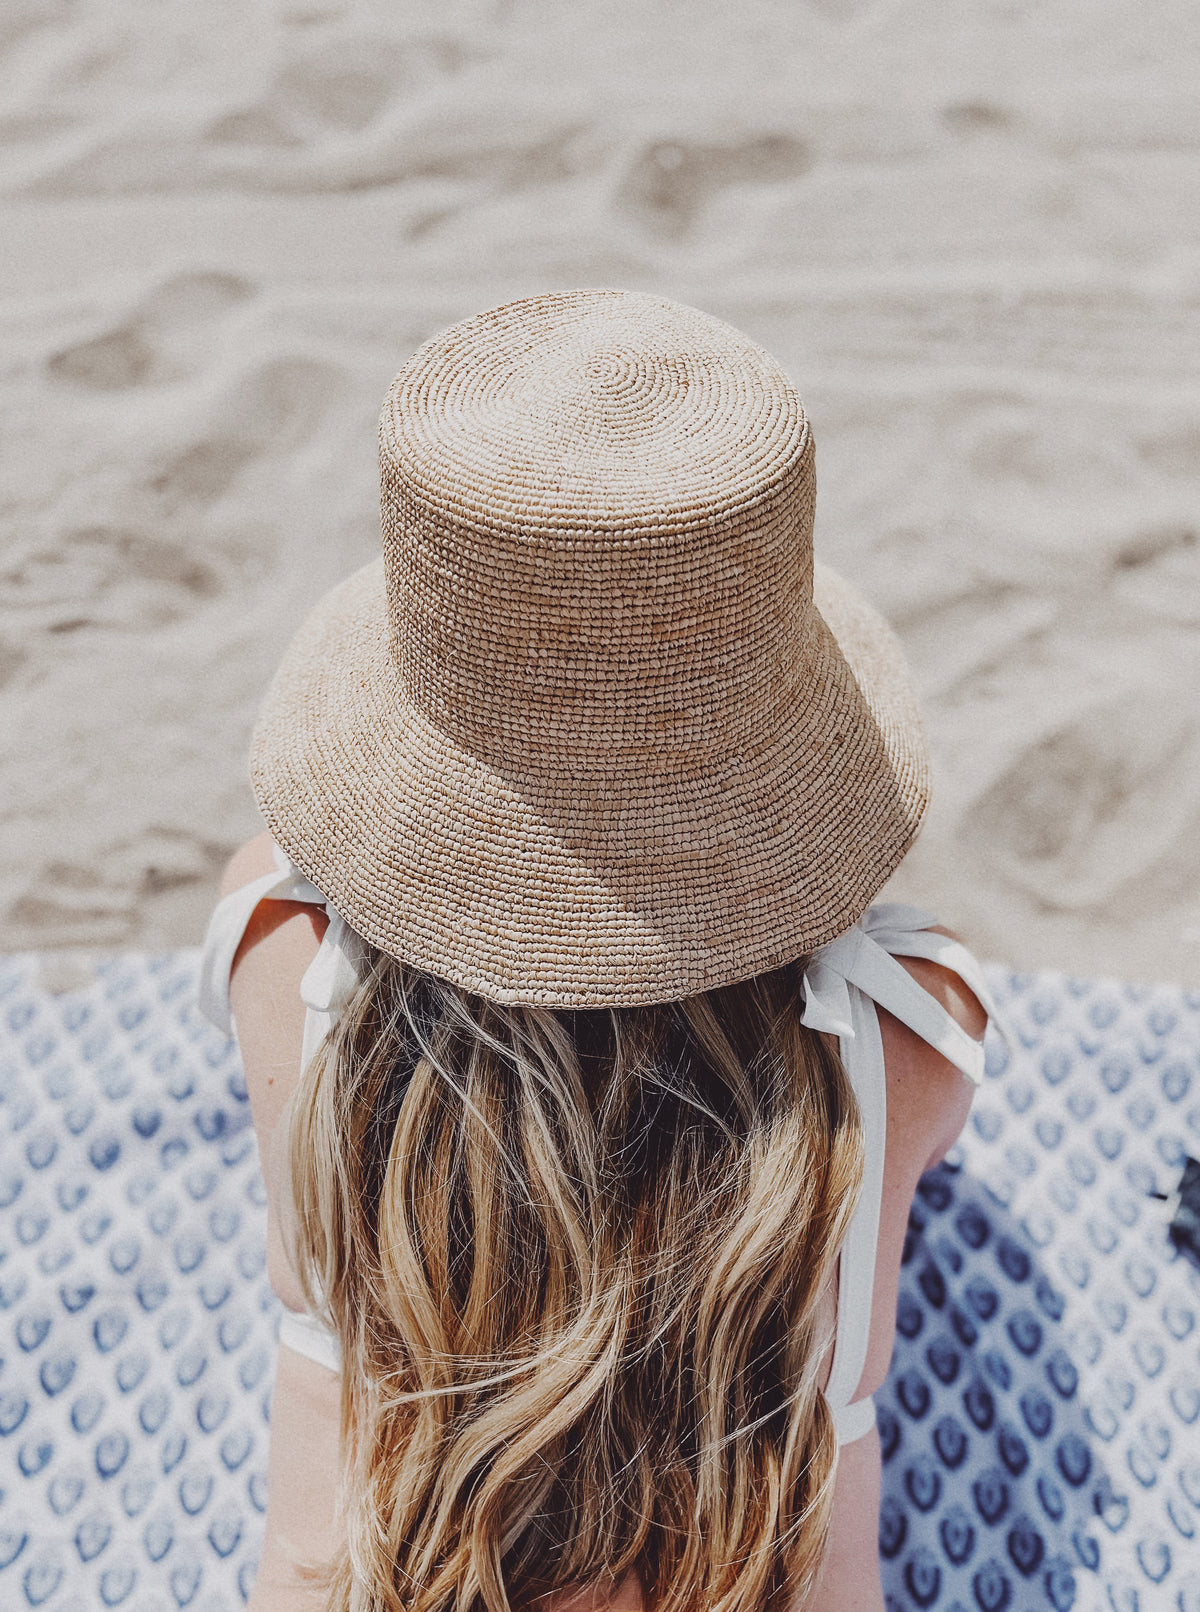 Hat Attack, one stop shopping for sunhats and packable styles